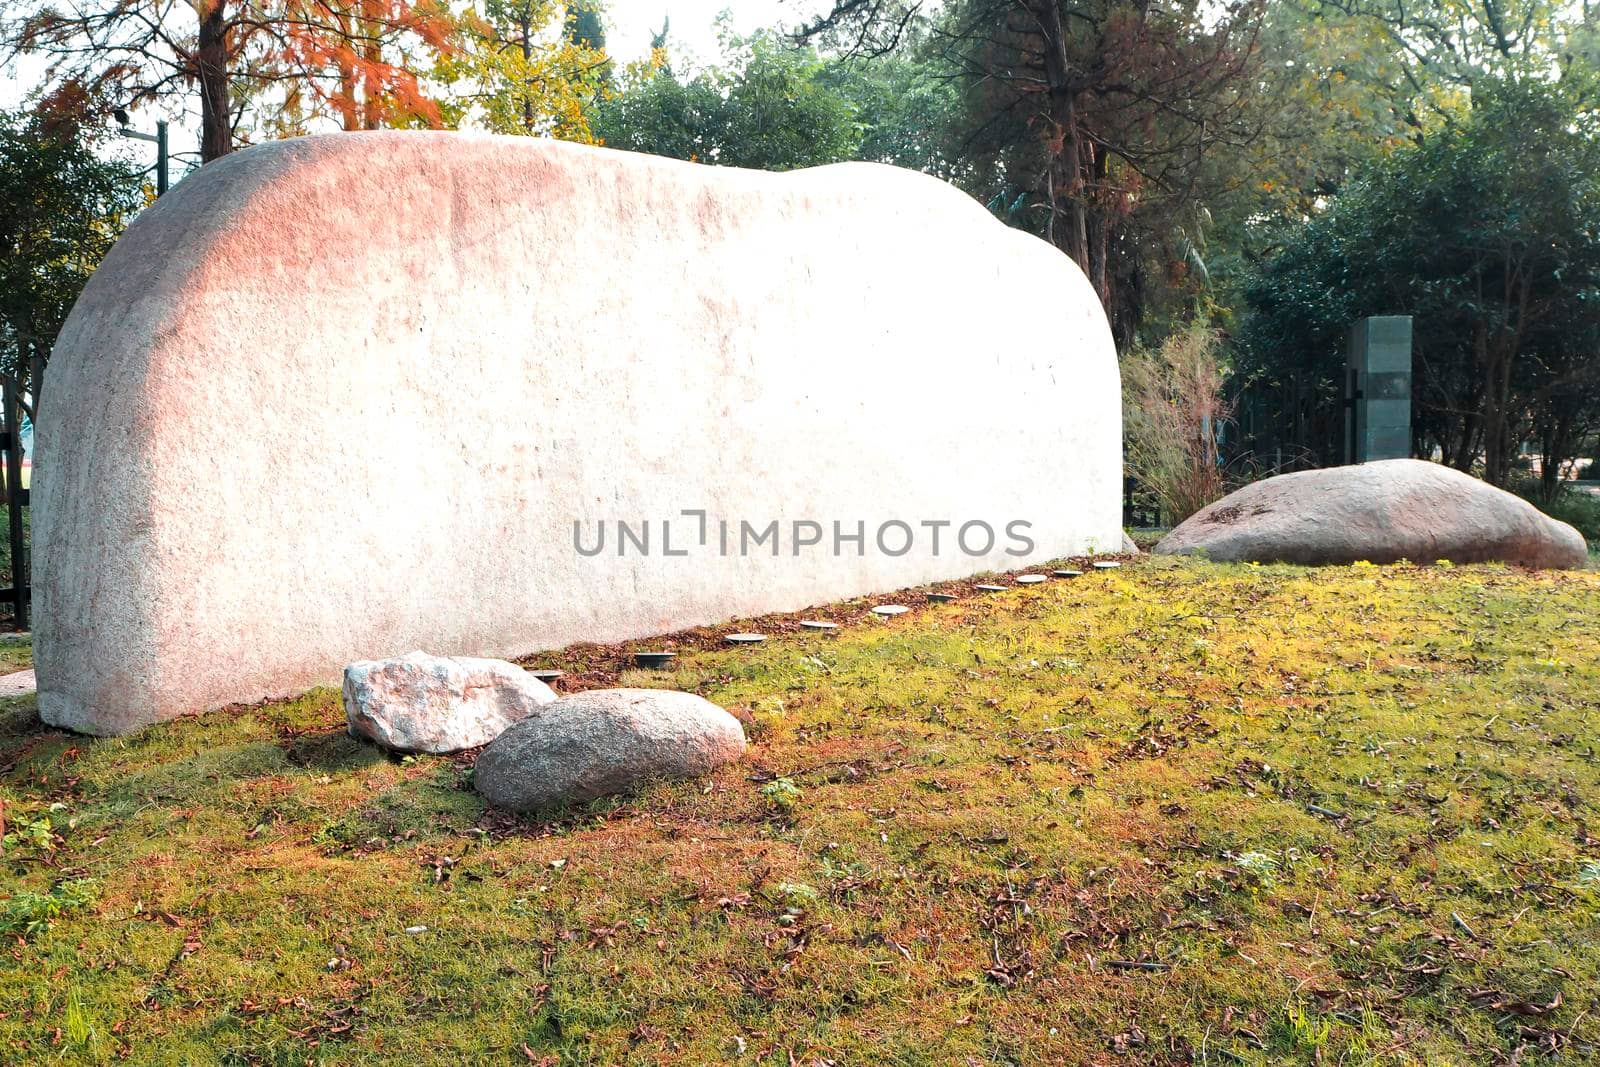 Empty space  for white Stone Tablet on Rock .engrave the name text information in public area .Park or entrance